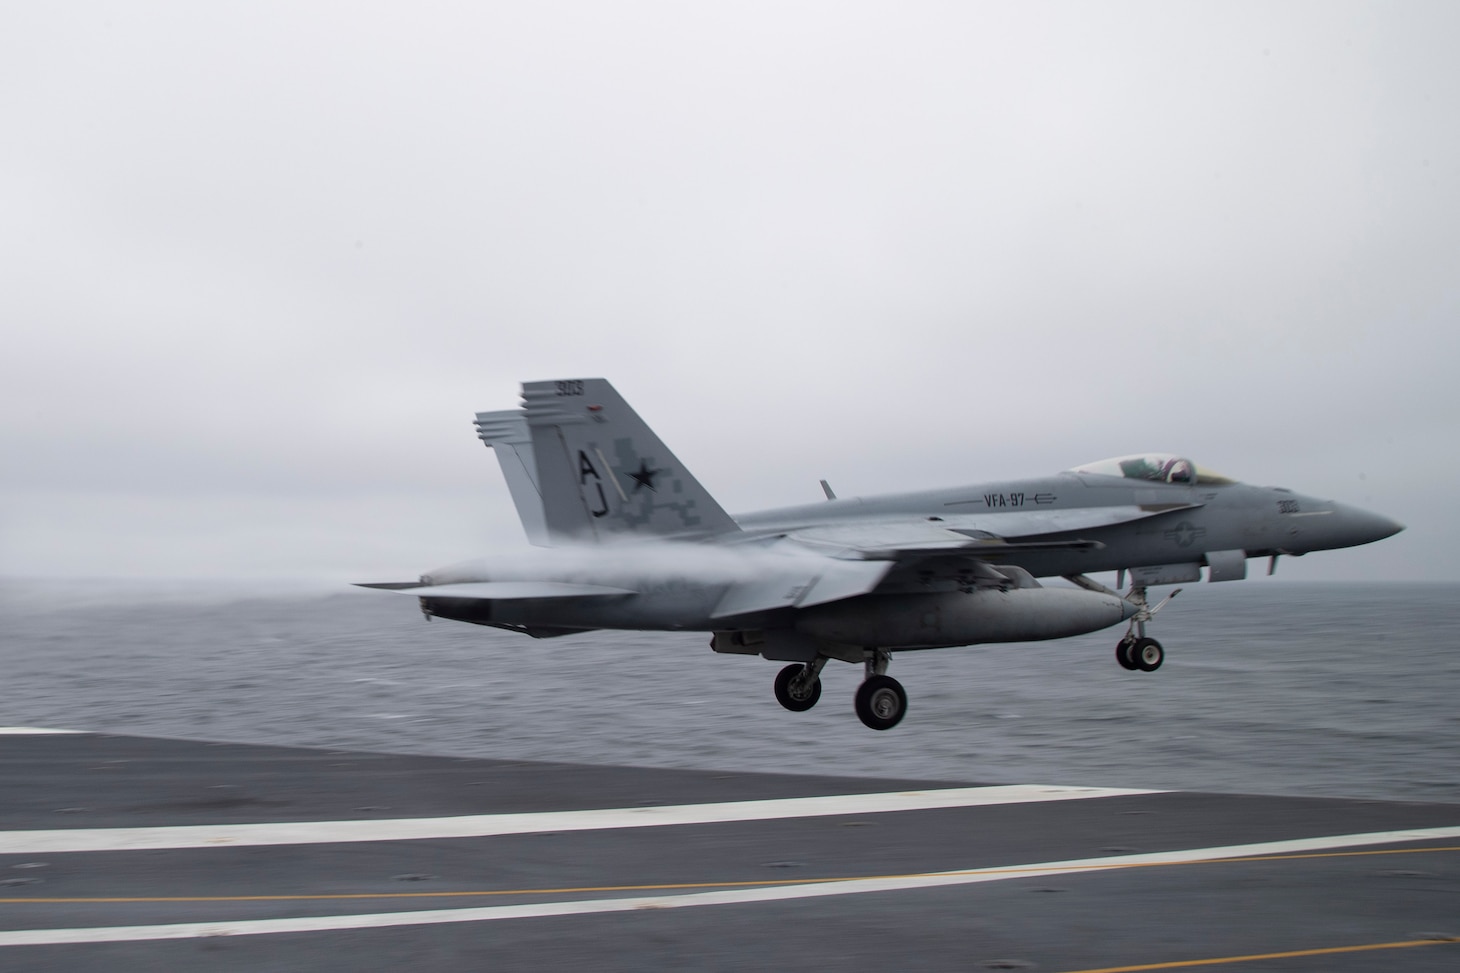 An F/A-18E Super Hornet attached to the "Warhawks" of Strike Fighter Squadron (VFA) 97, launches from the flight deck of the aircraft carrier USS Gerald R. Ford (CVN 78)., Nov. 13, 2020.